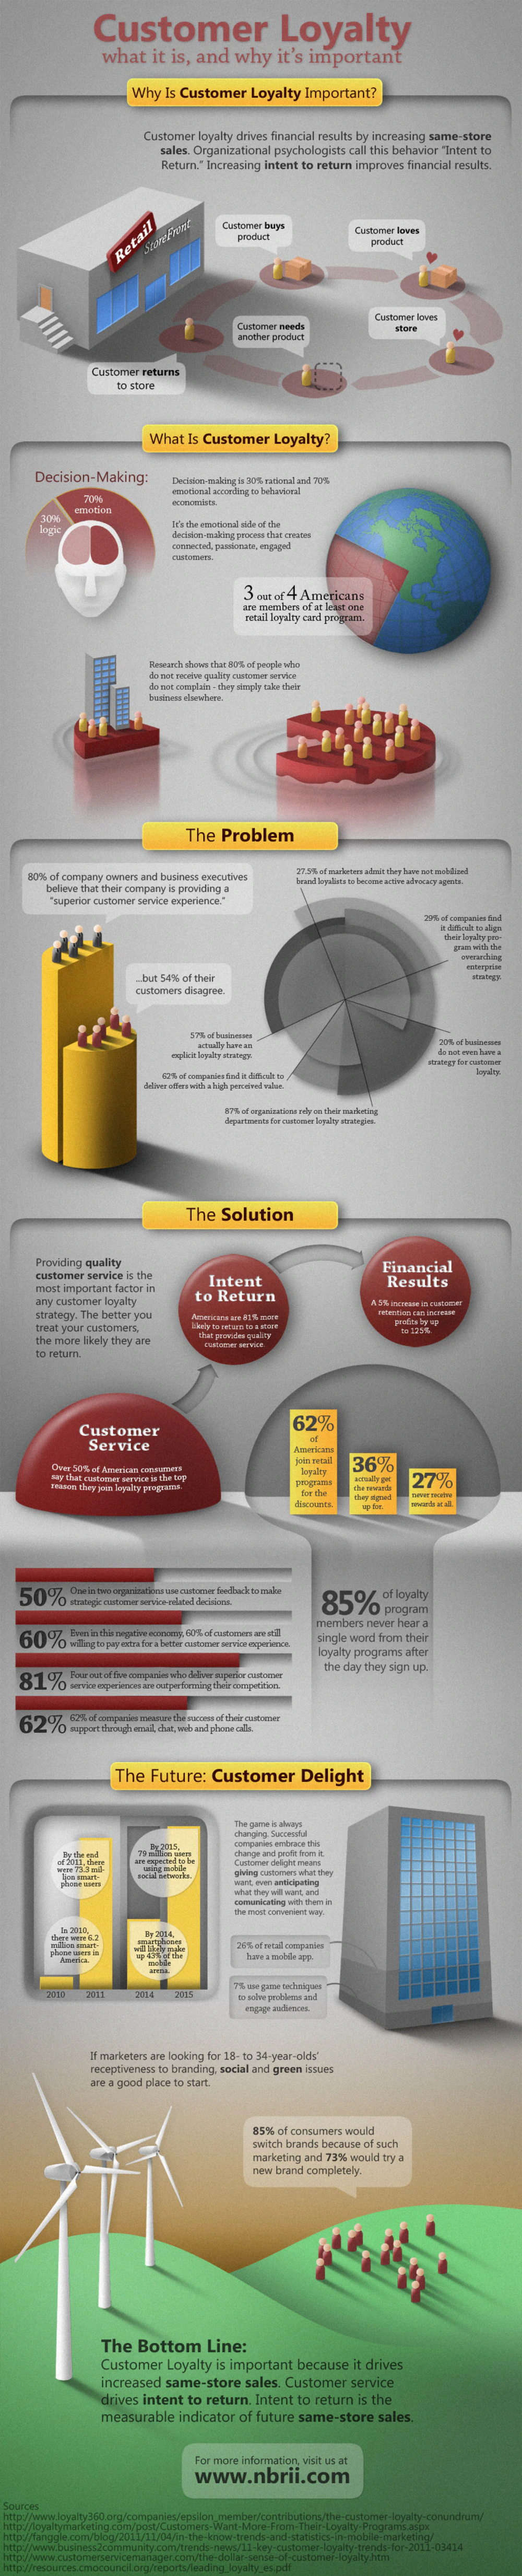 Customer Loyalty – What it is and Why it’s Important infographic